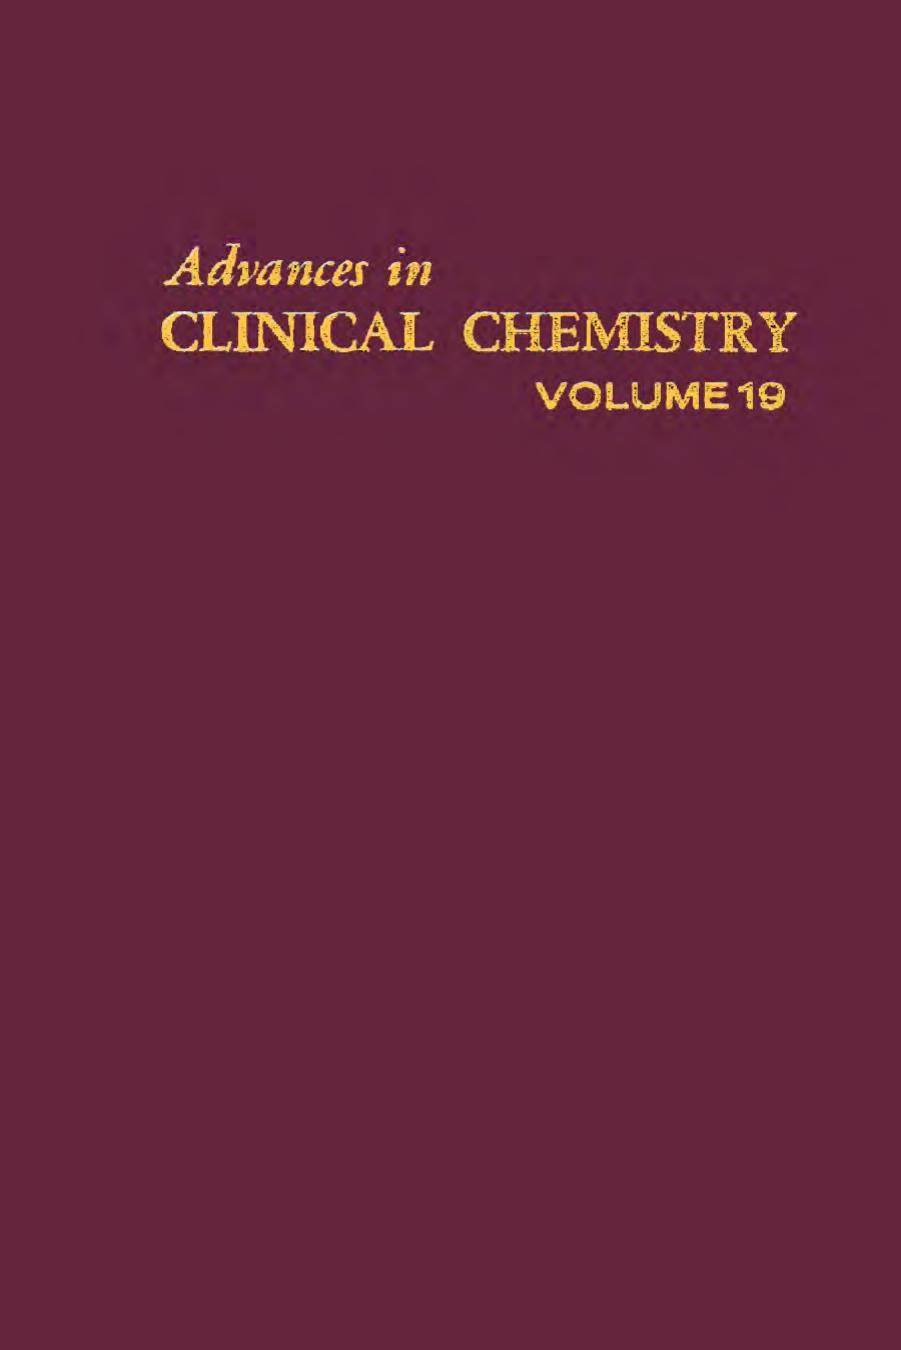 Advances in Clinical Chemistry. Volume 19